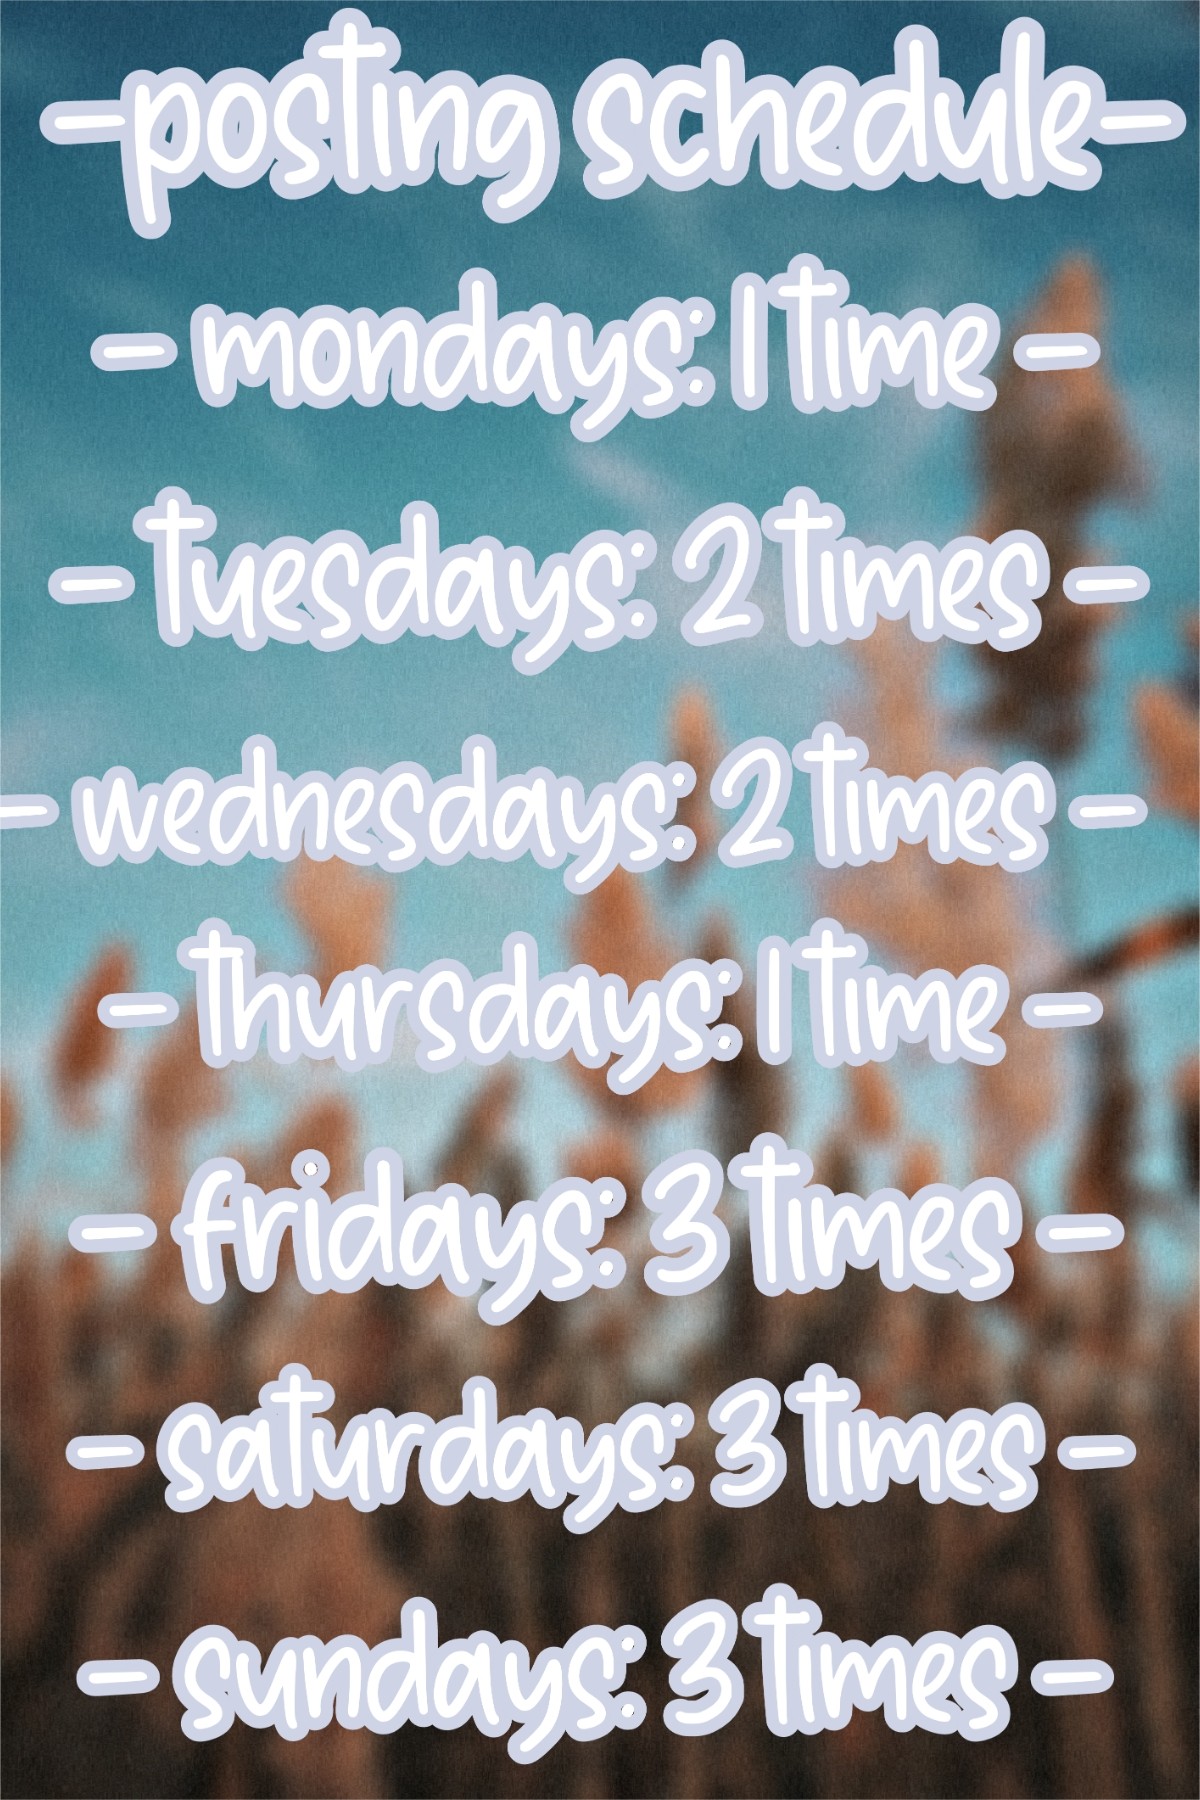 tap!
I'll be starting this schedule on Monday 28th of February ^^